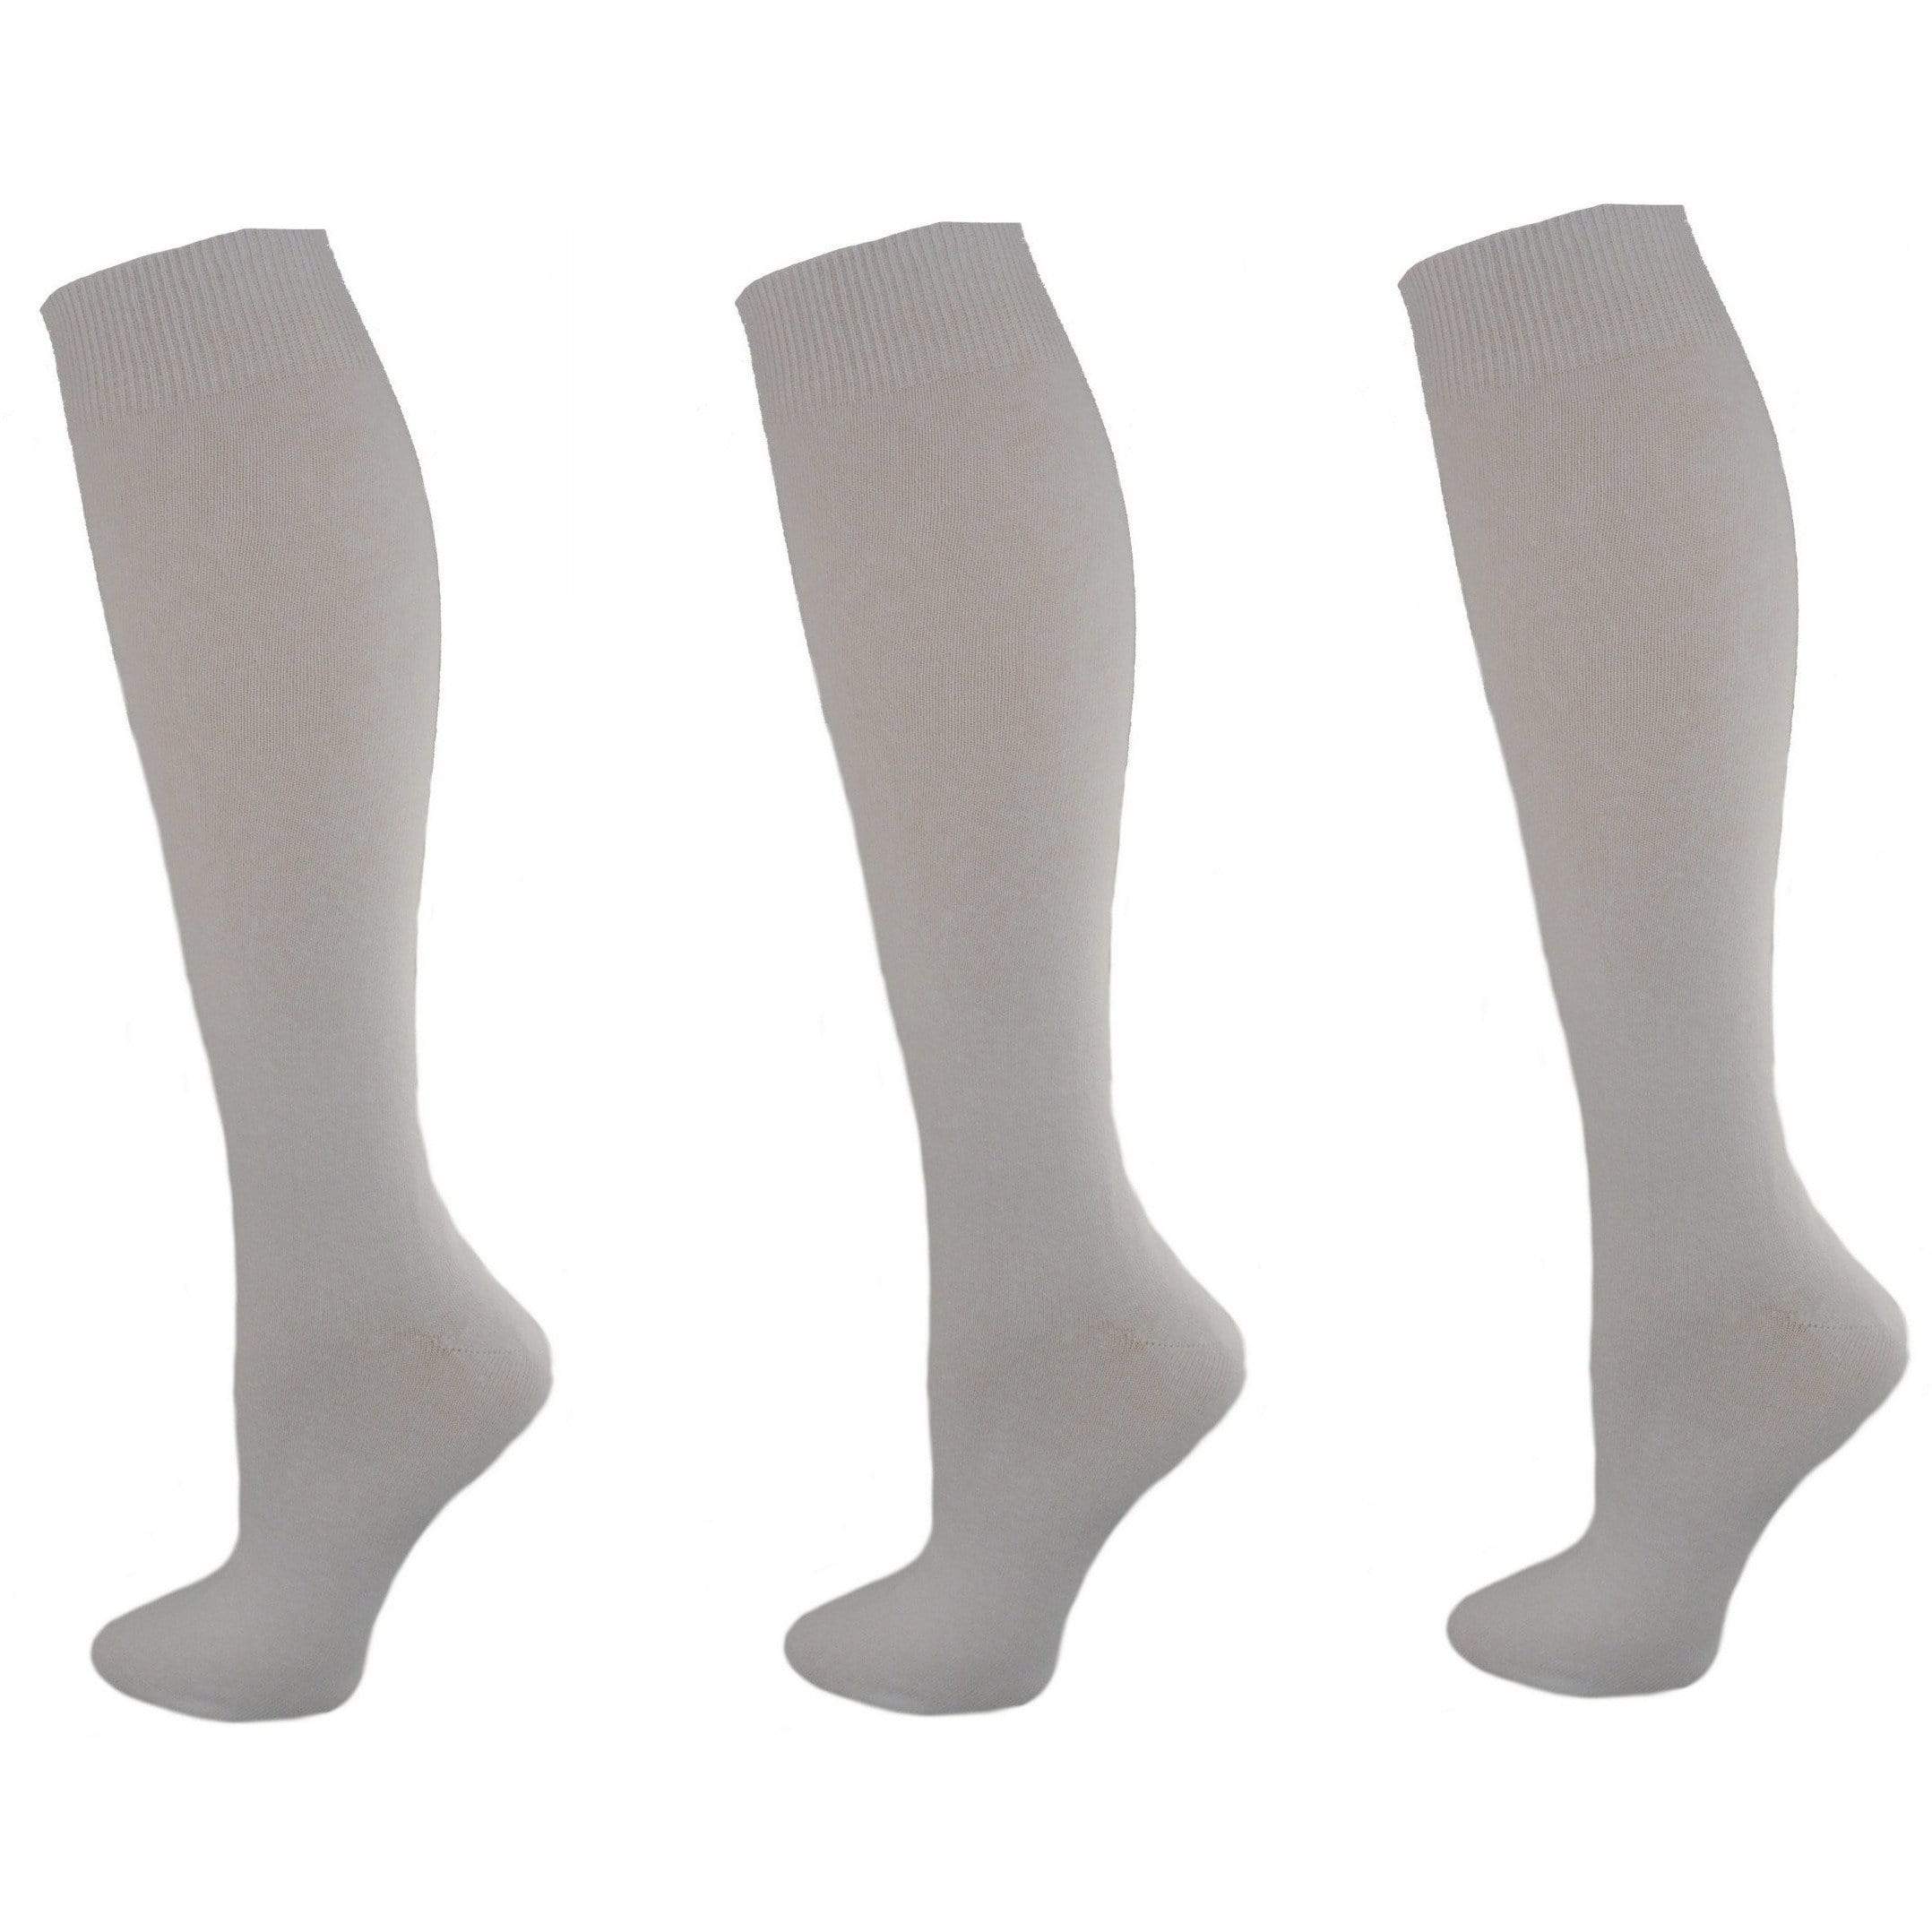 Classic Flat Knit Combed Cotton Knee High Socks 3 pair pack G7200